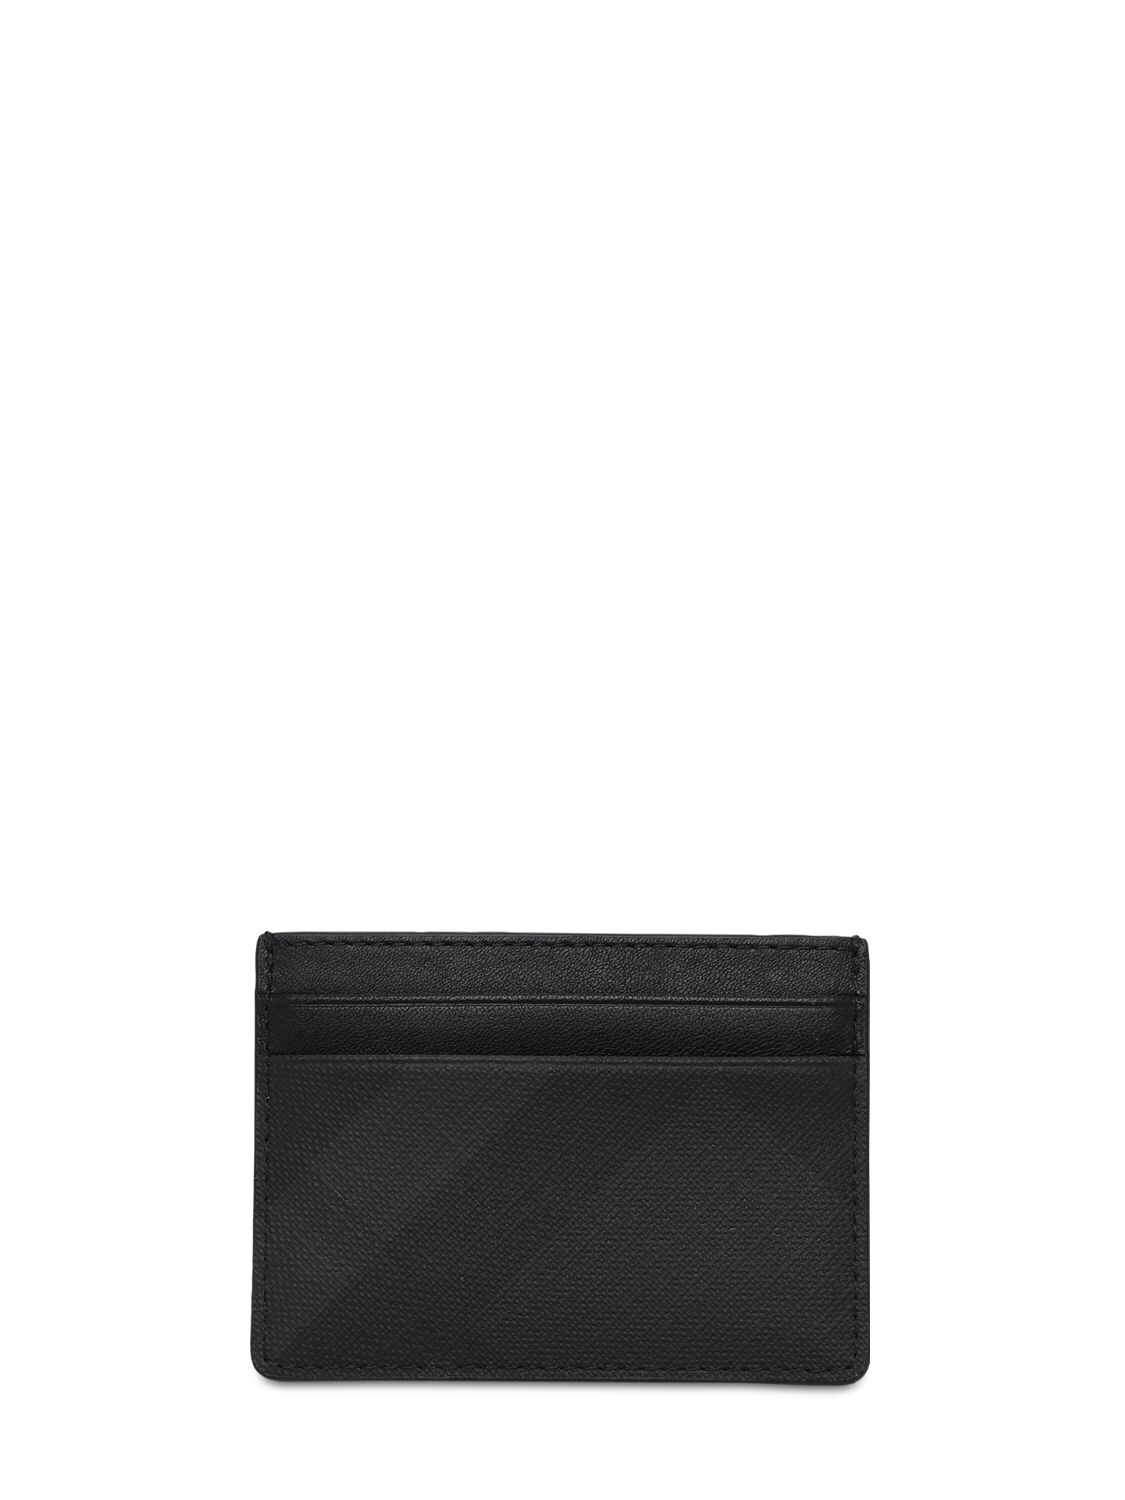 Burberry London Check Tech Card Holder In Charcoal